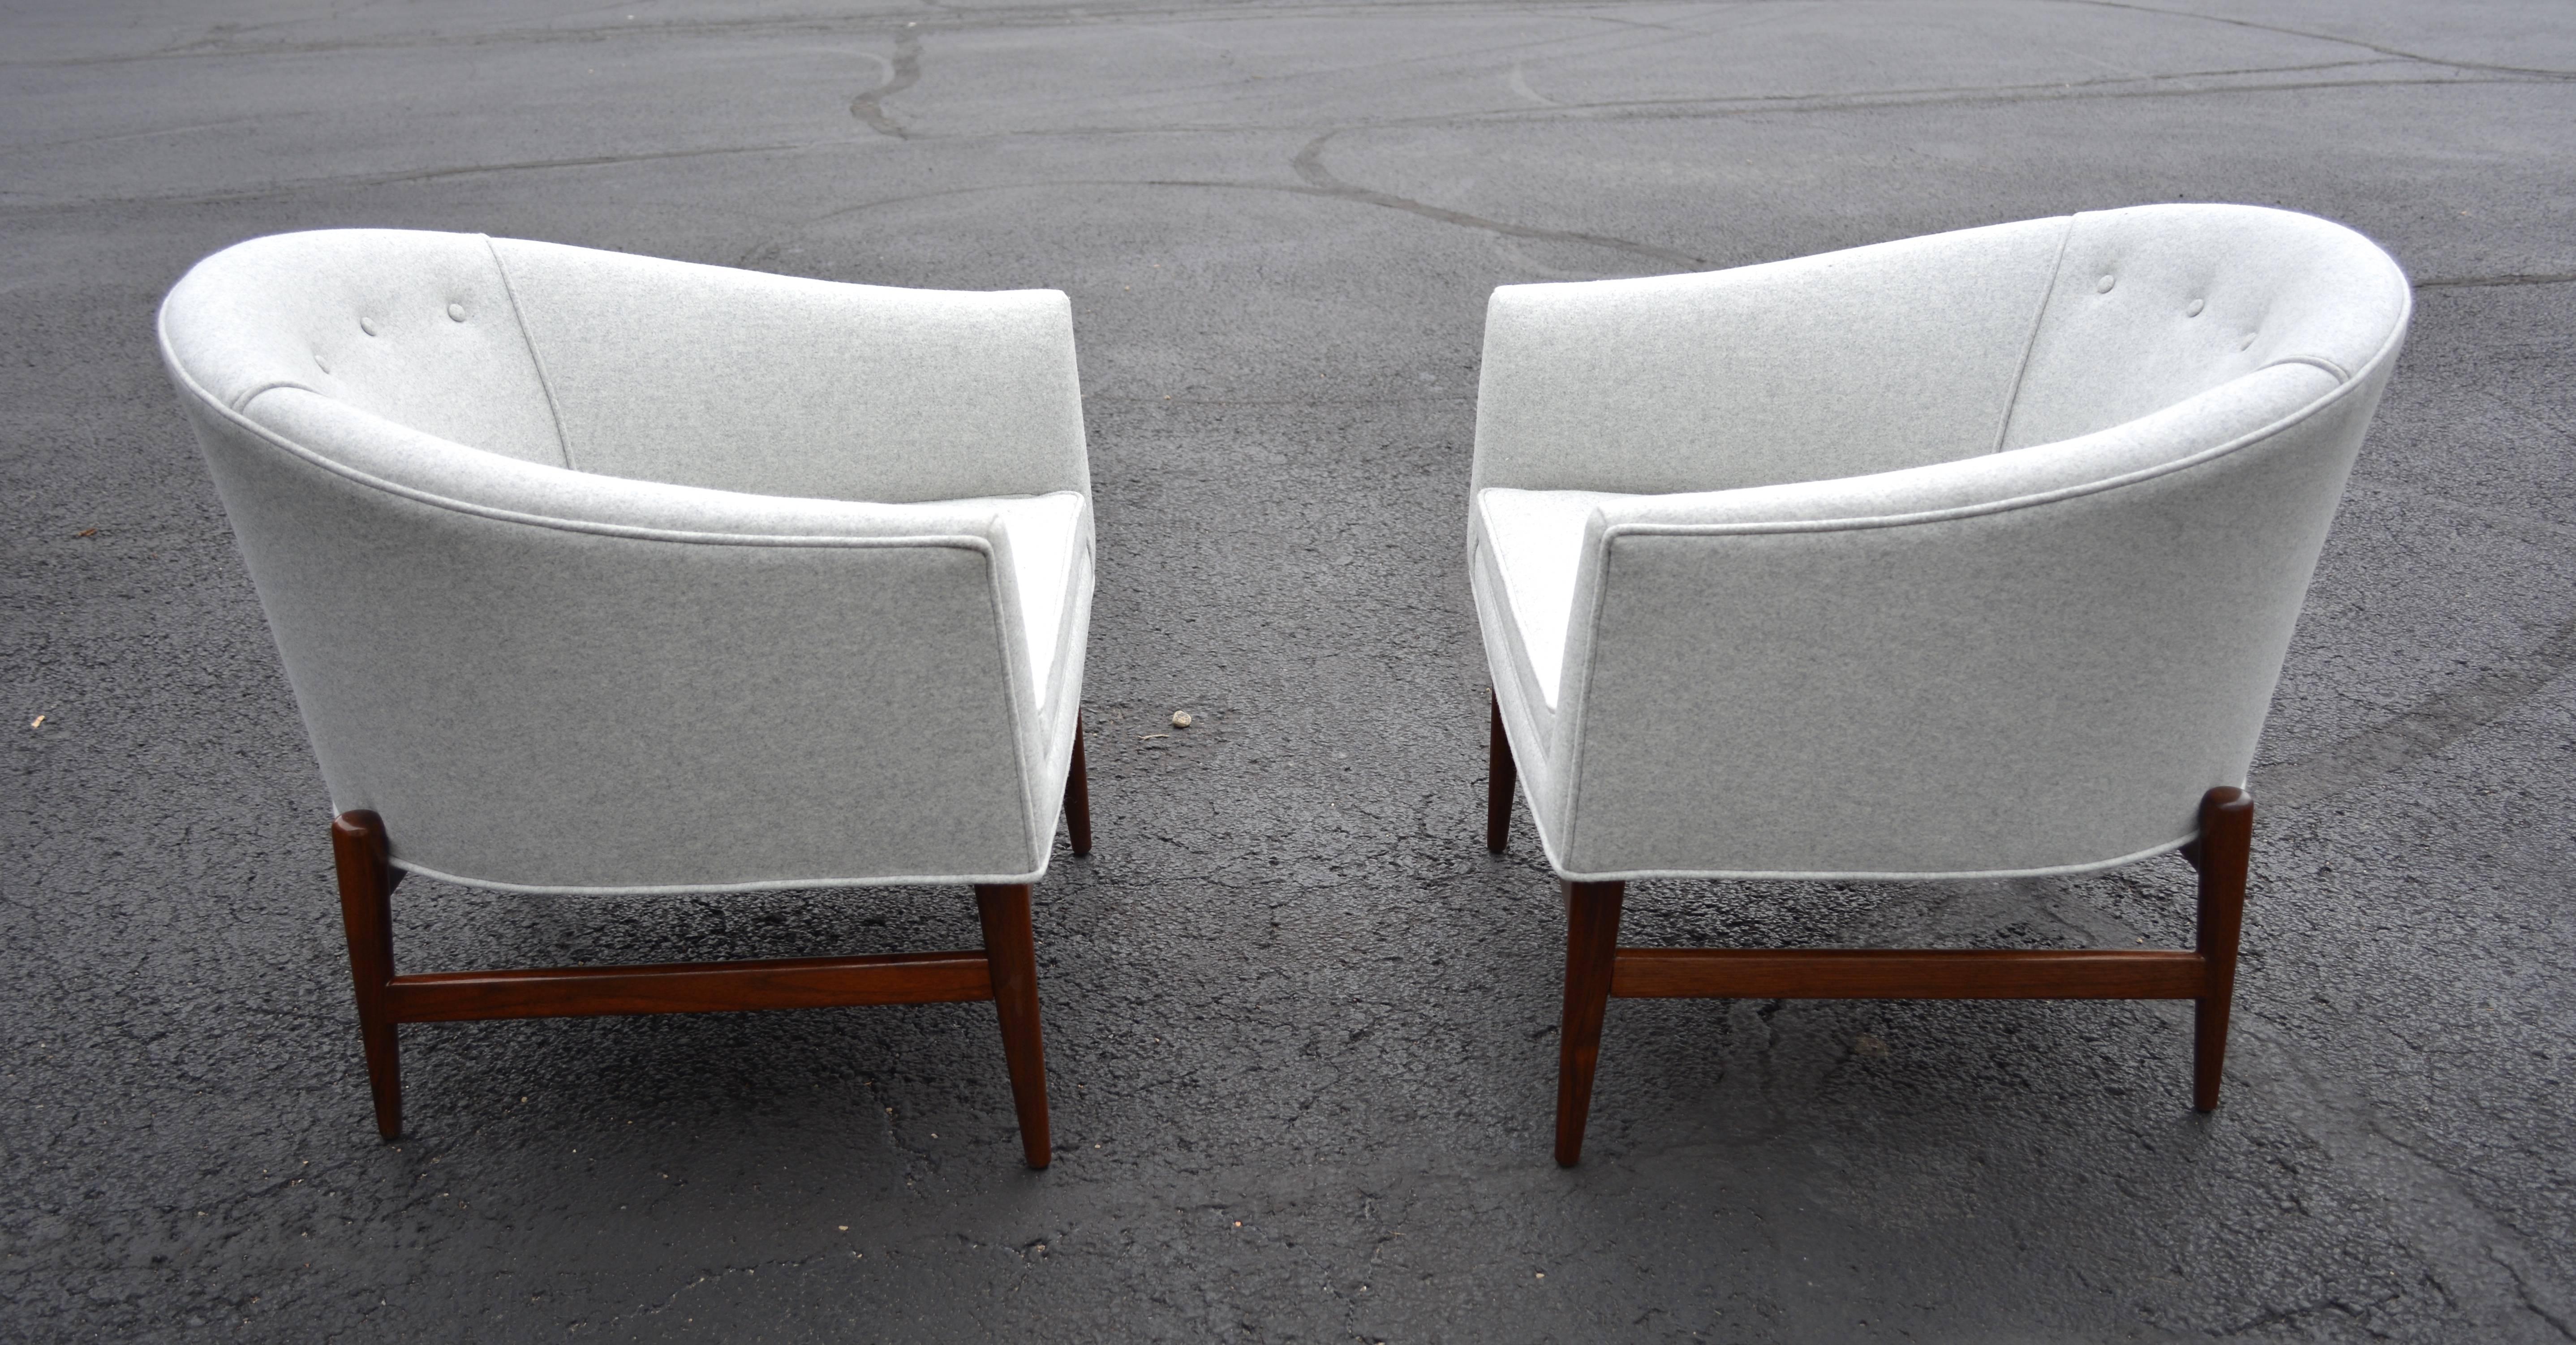 A pair of lounge chairs designed by Lawrence Peabody.  Barrel shaped bodies that have been recovered in a light grey melange wool sit atop refinished solid walnut bases, which gives them a floating appearance.  Newly restored.